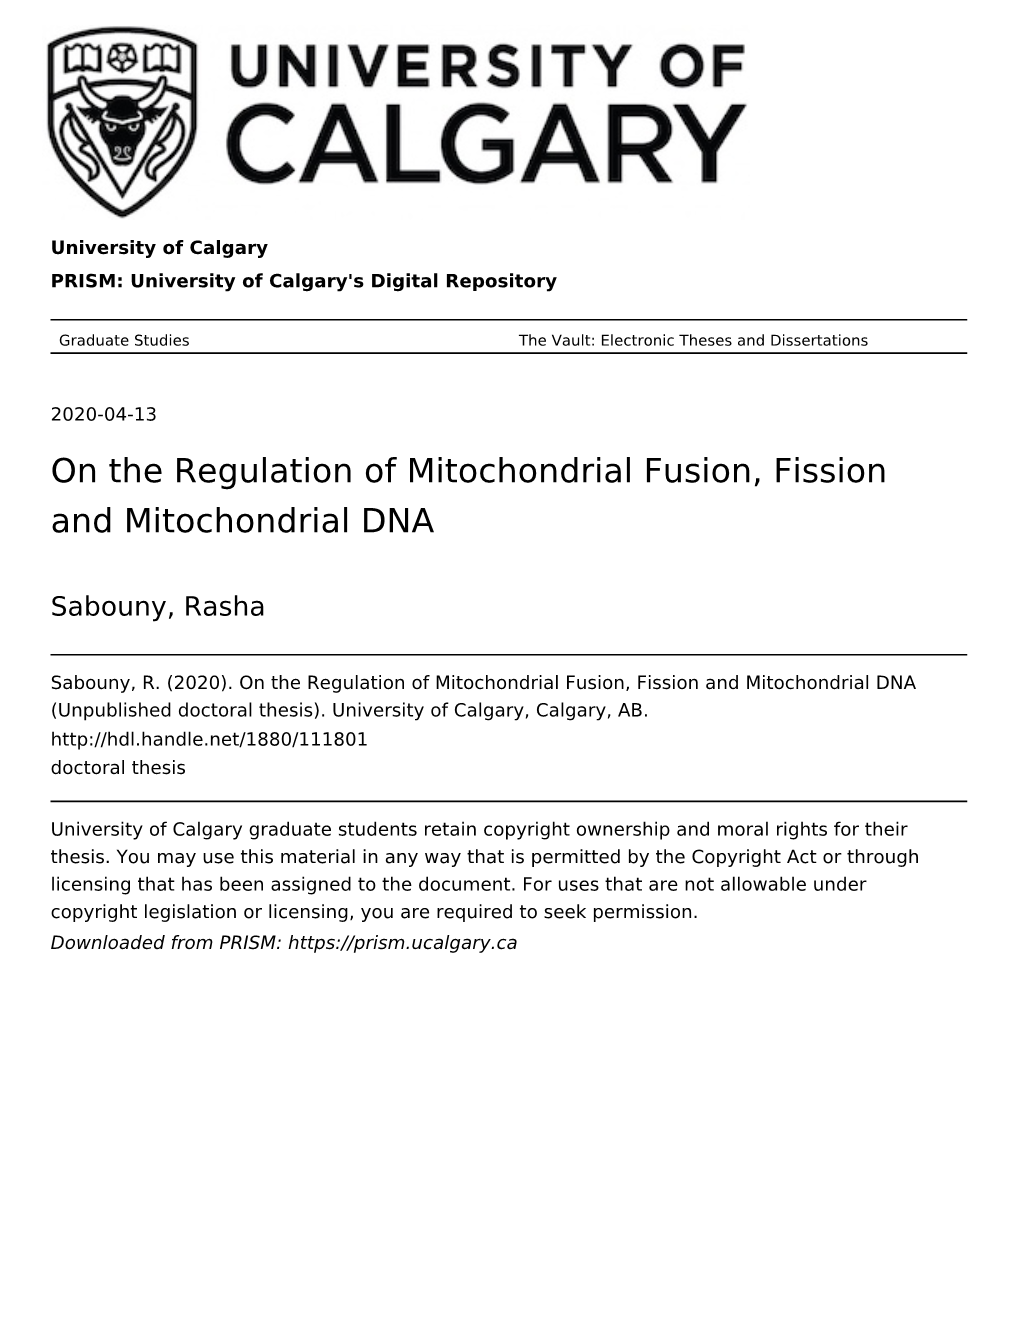 On the Regulation of Mitochondrial Fusion, Fission and Mitochondrial DNA